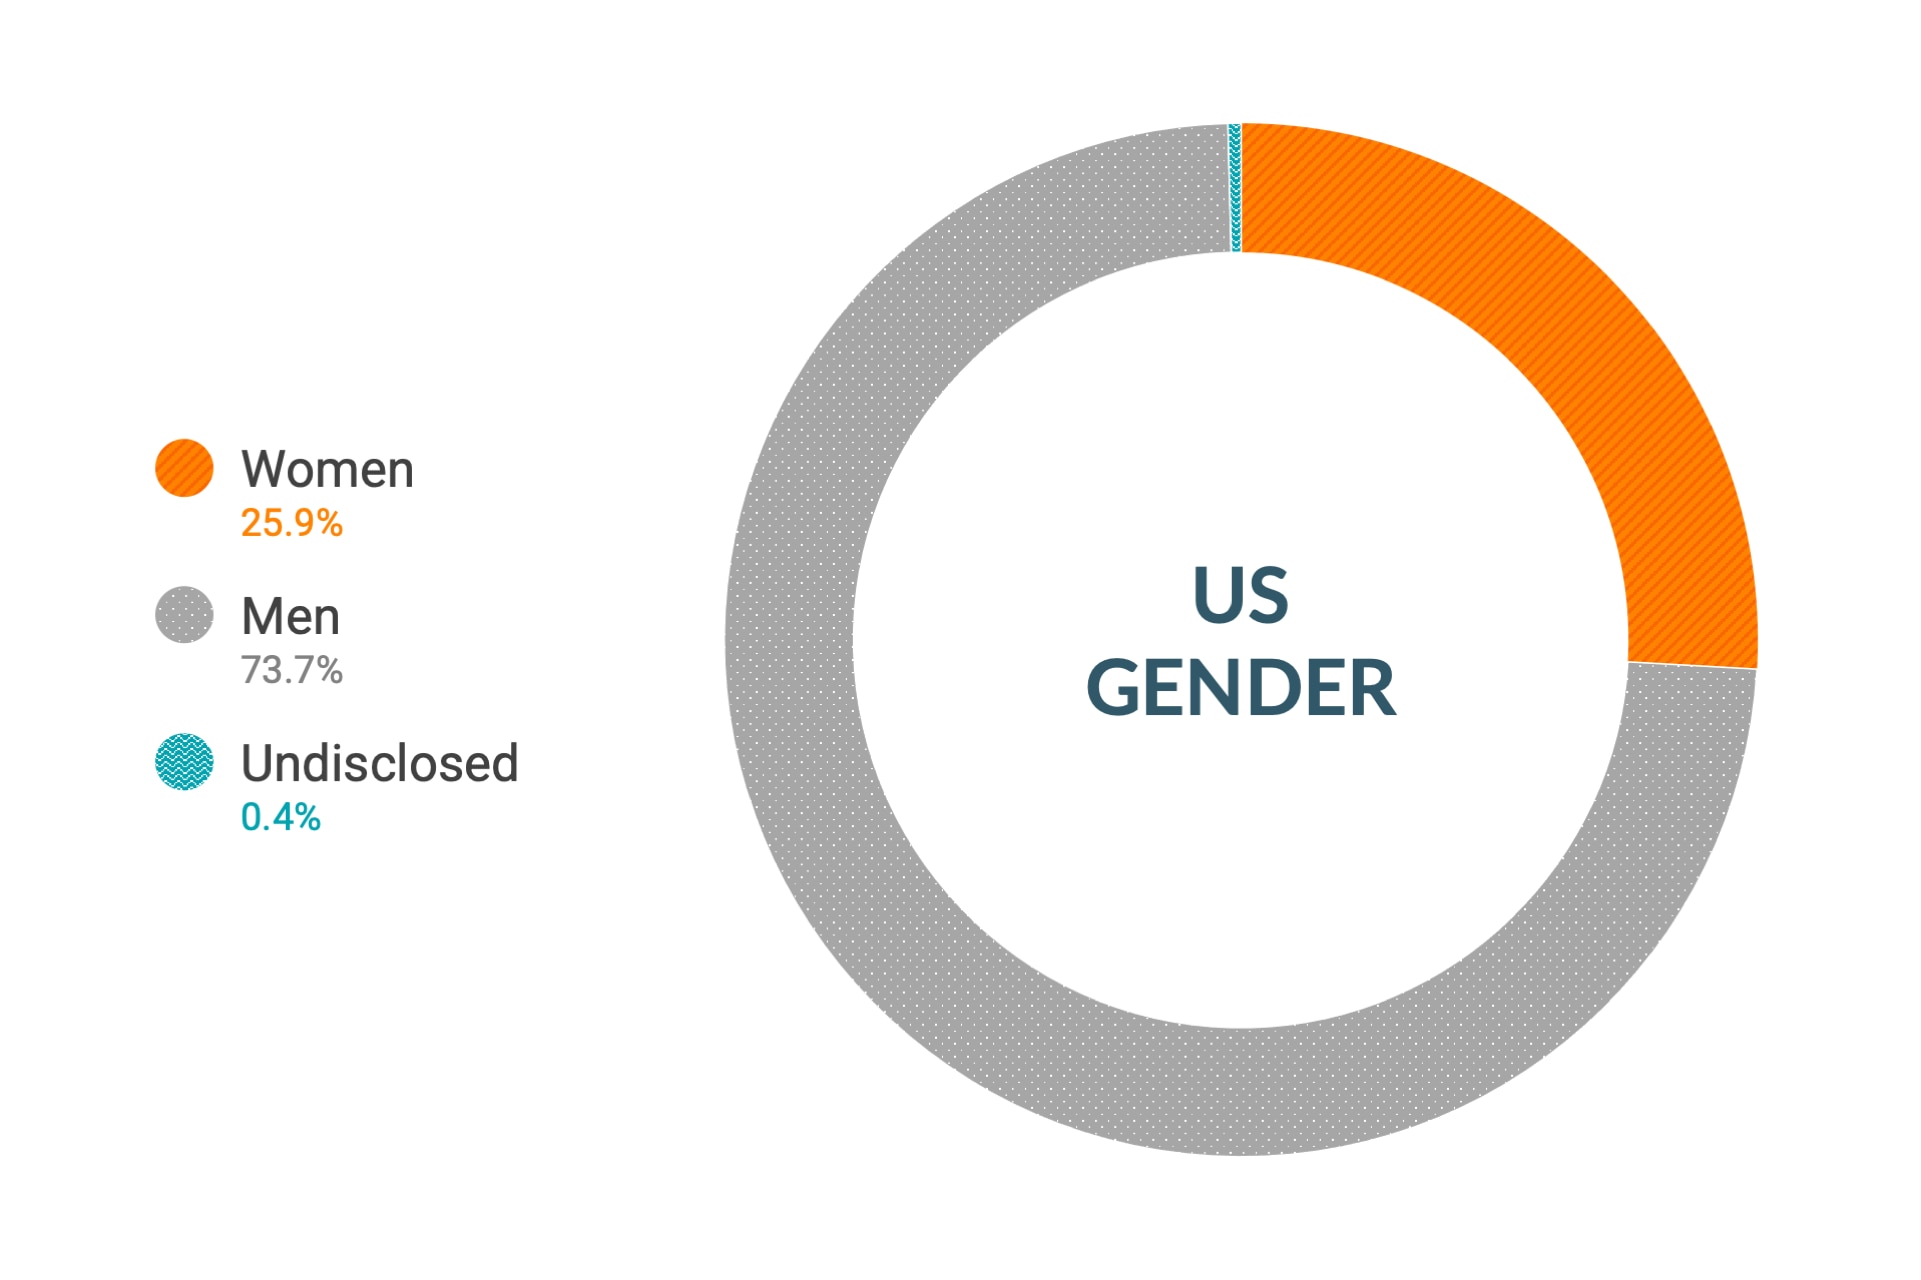 Cloudera Diversity and Inclusion data for U.S. Gender: Women 25.9%, Men 73.7%, Undisclosed 0.4%